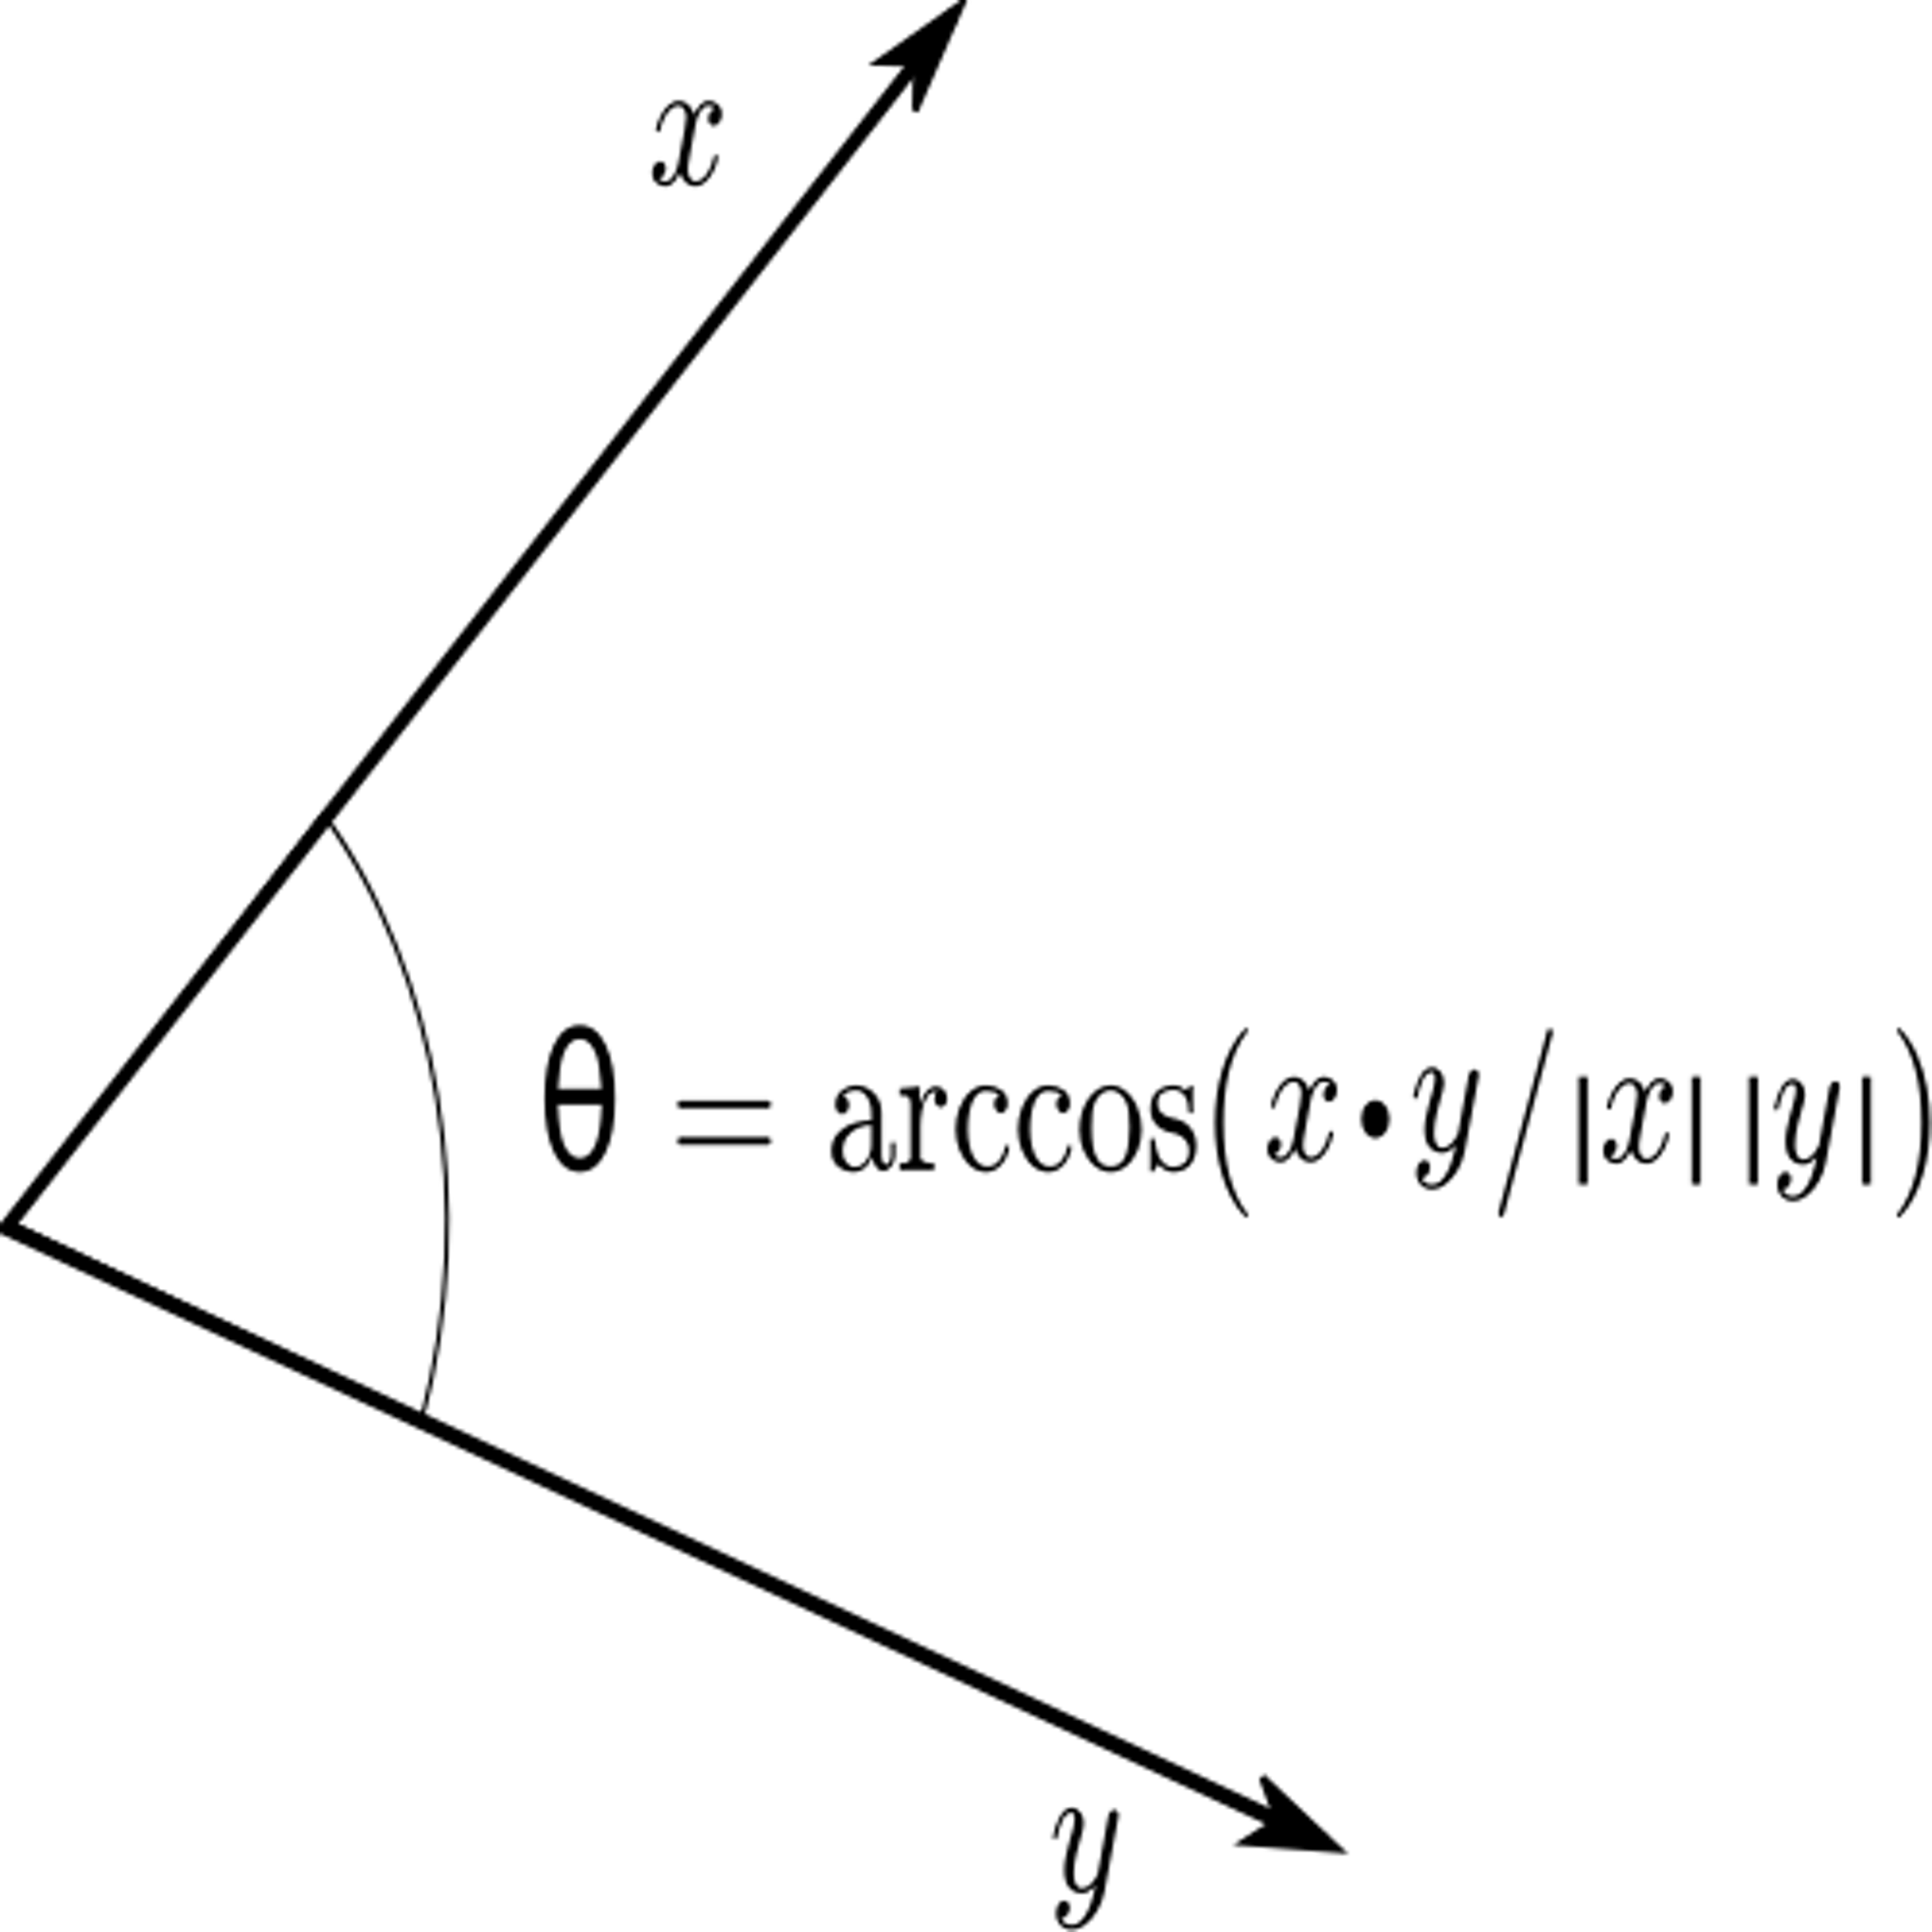 Determining the Angle Between These Vectors.